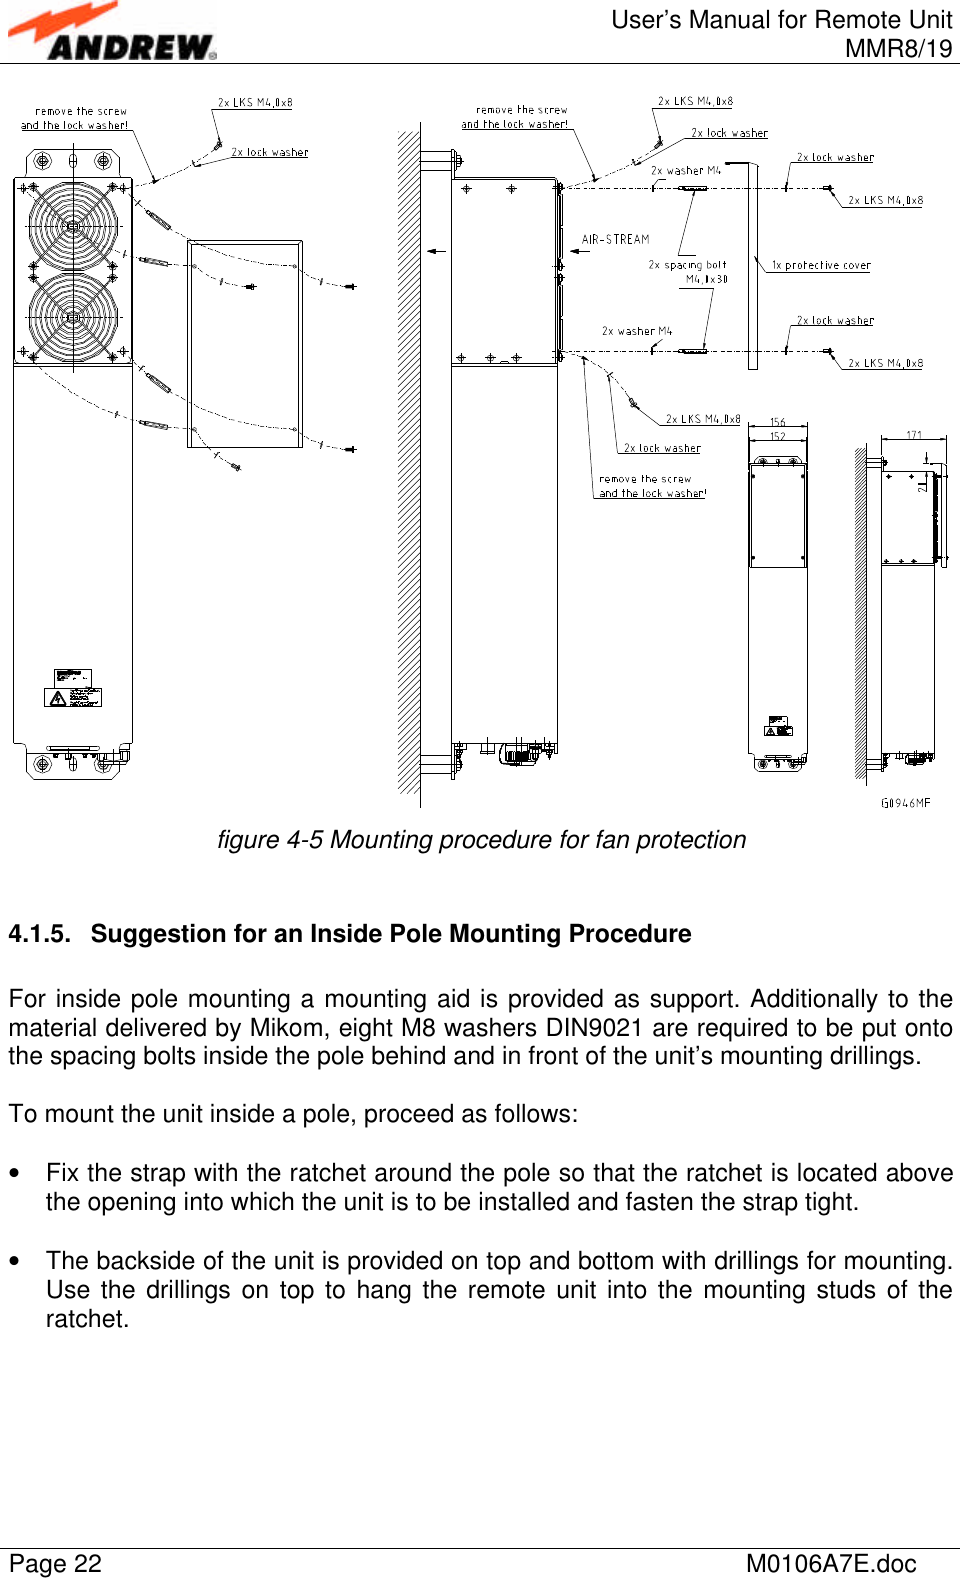 User’s Manual for Remote UnitMMR8/19Page 22 M0106A7E.docfigure 4-5 Mounting procedure for fan protection4.1.5. Suggestion for an Inside Pole Mounting ProcedureFor inside pole mounting a mounting aid is provided as support. Additionally to thematerial delivered by Mikom, eight M8 washers DIN9021 are required to be put ontothe spacing bolts inside the pole behind and in front of the unit’s mounting drillings.To mount the unit inside a pole, proceed as follows:• Fix the strap with the ratchet around the pole so that the ratchet is located abovethe opening into which the unit is to be installed and fasten the strap tight.• The backside of the unit is provided on top and bottom with drillings for mounting.Use the drillings on top to hang the remote unit into the mounting studs of theratchet.